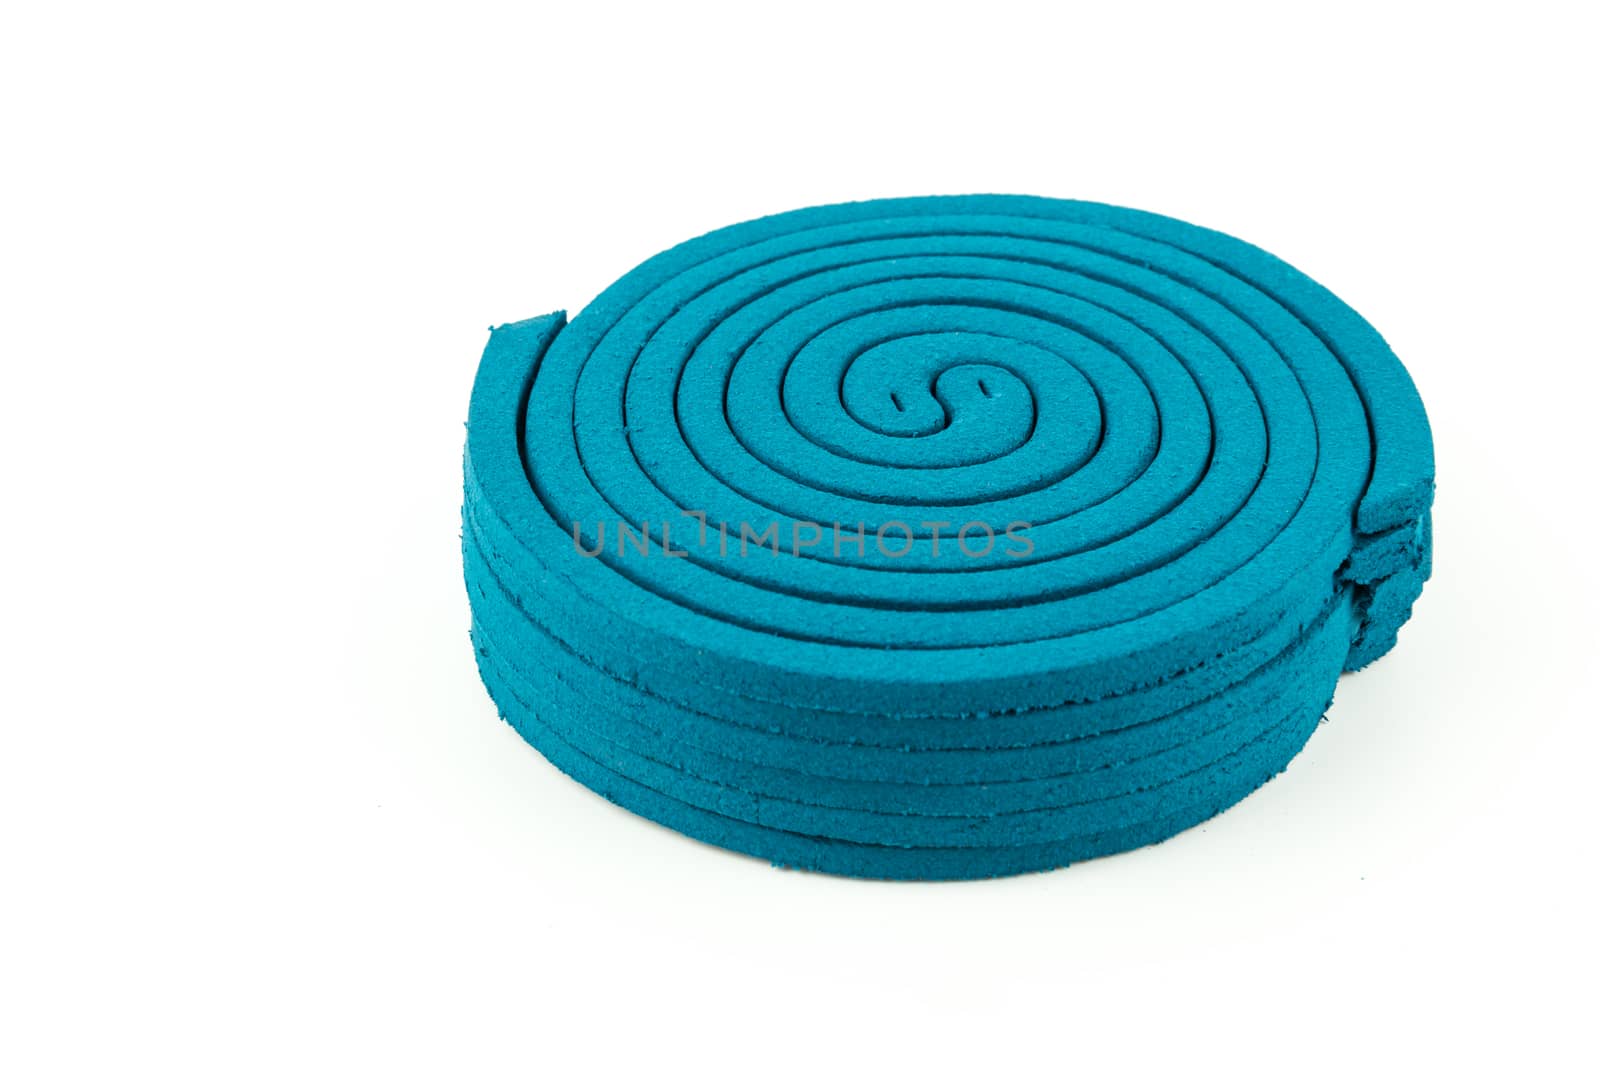 mosquito repellent incense coil on white background	